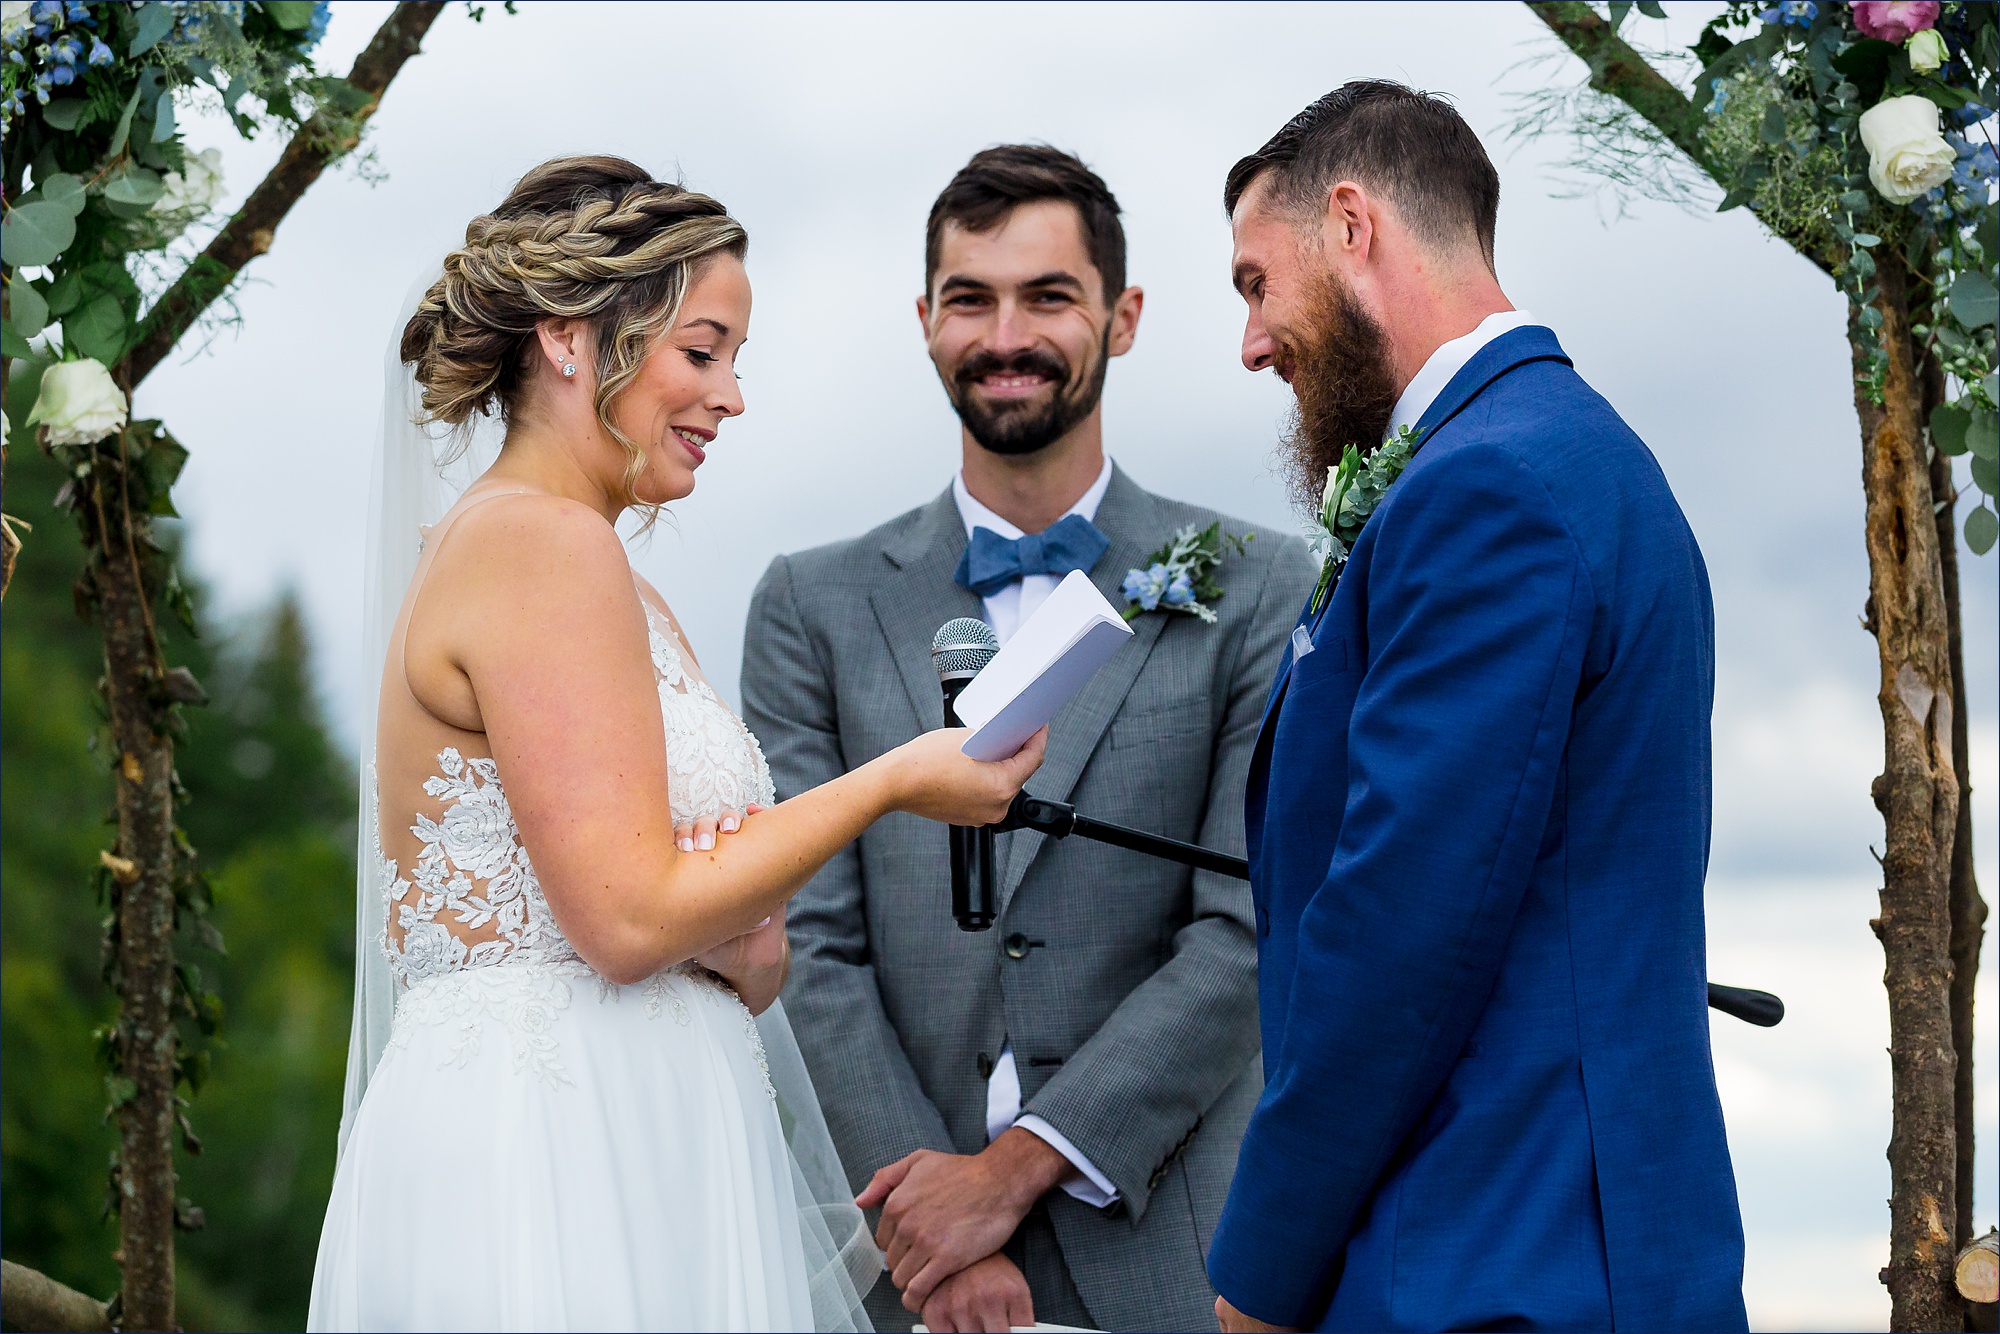 The bride reads her vows to her husband while her brother smiles warmly